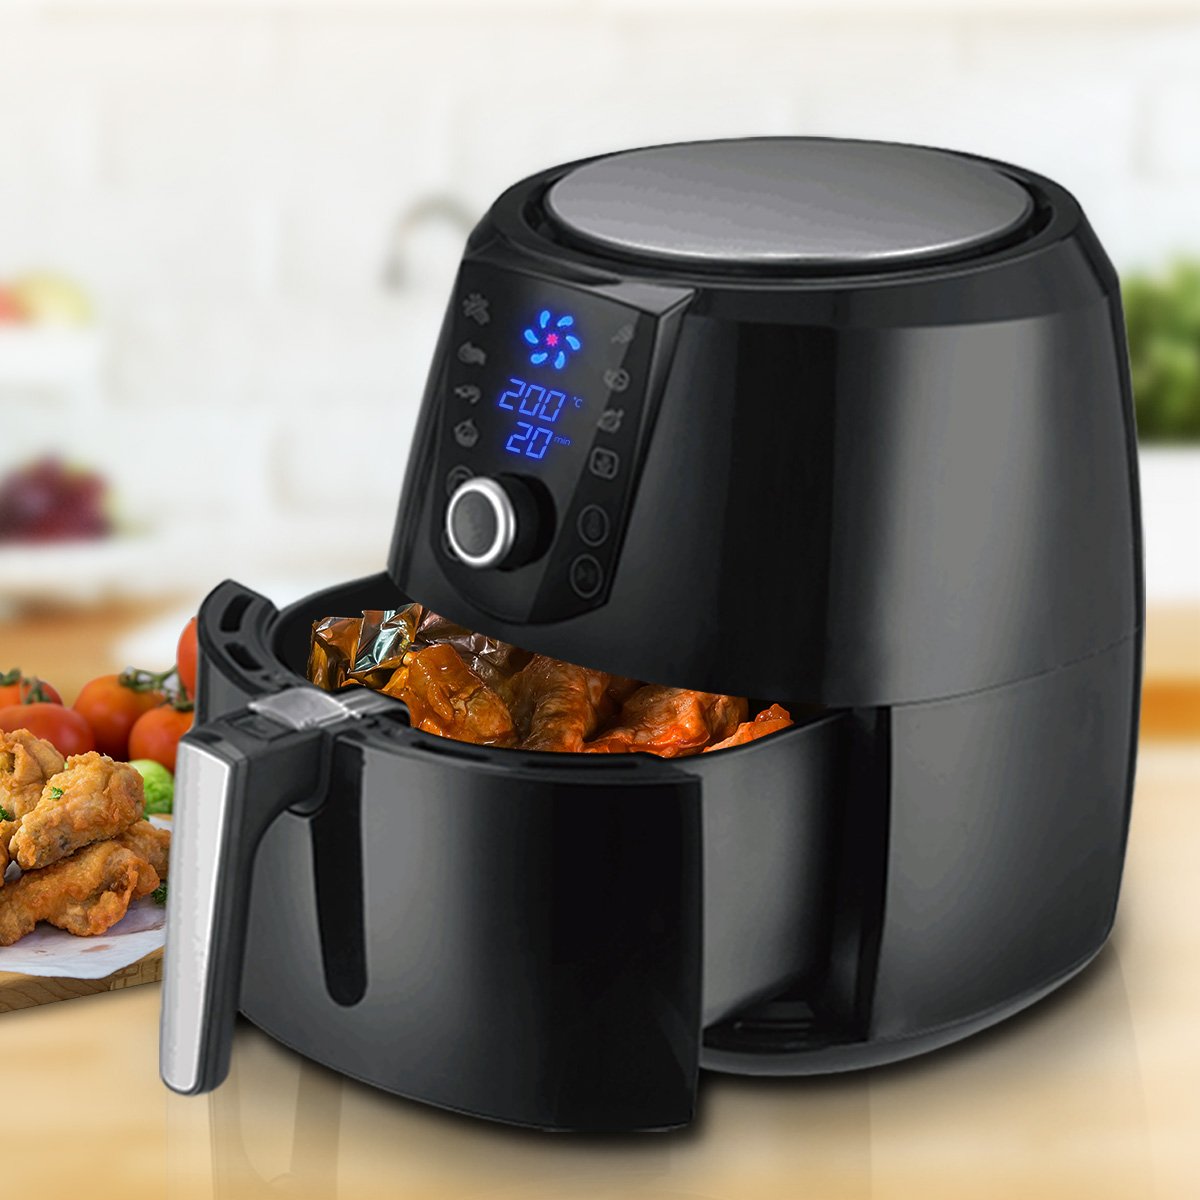 Pronti 7.2l Electric Air Fryer - 1800w Healthy Cooker For Oil-free Low-fat Cooking Kitchen Bench-top Oven Oil Free Low Fat - Black - SILBERSHELL